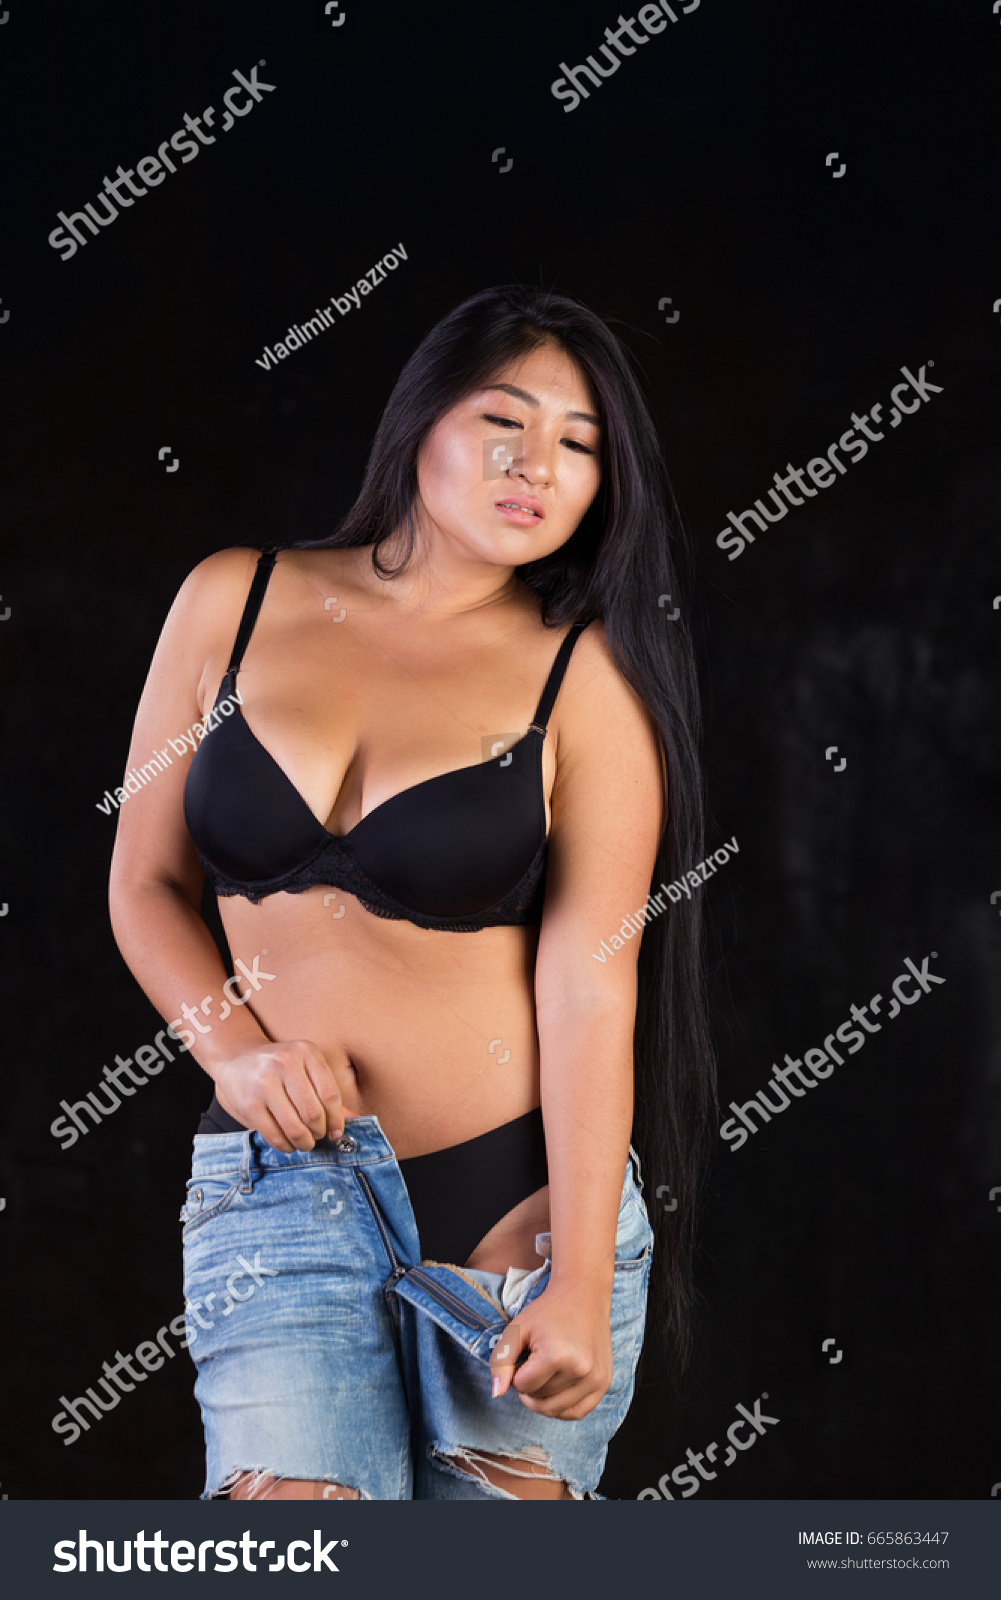 Asian busty half Category:Nude or